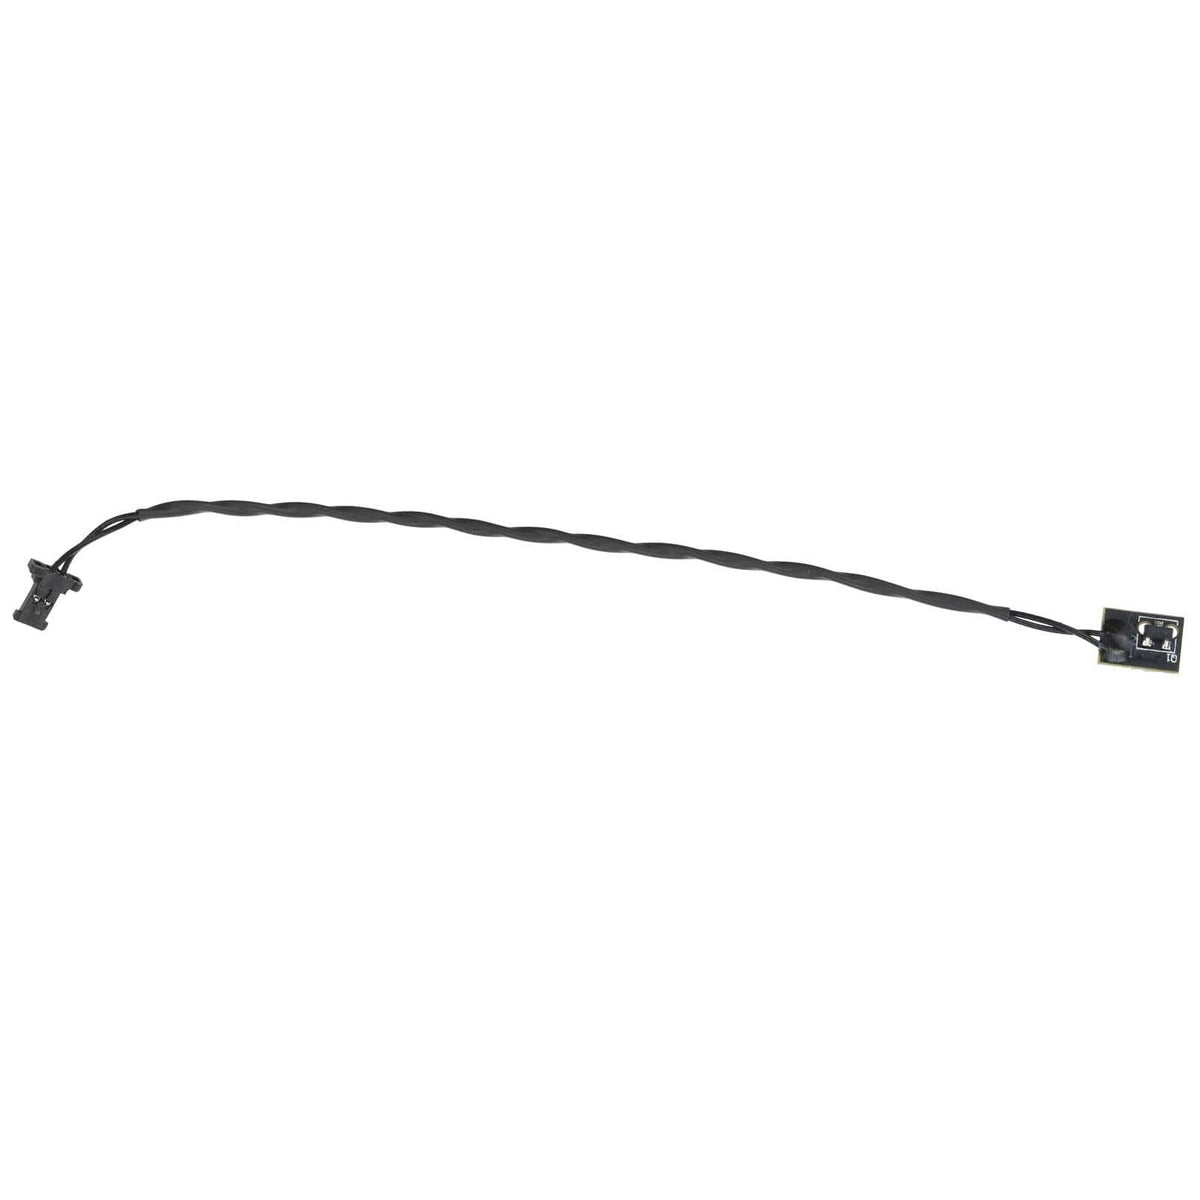 LCD TEMPERATURE SENSOR CABLE FOR IMAC 27" A1419/A2115 (LATE 2012,MID 2020) 923-0310